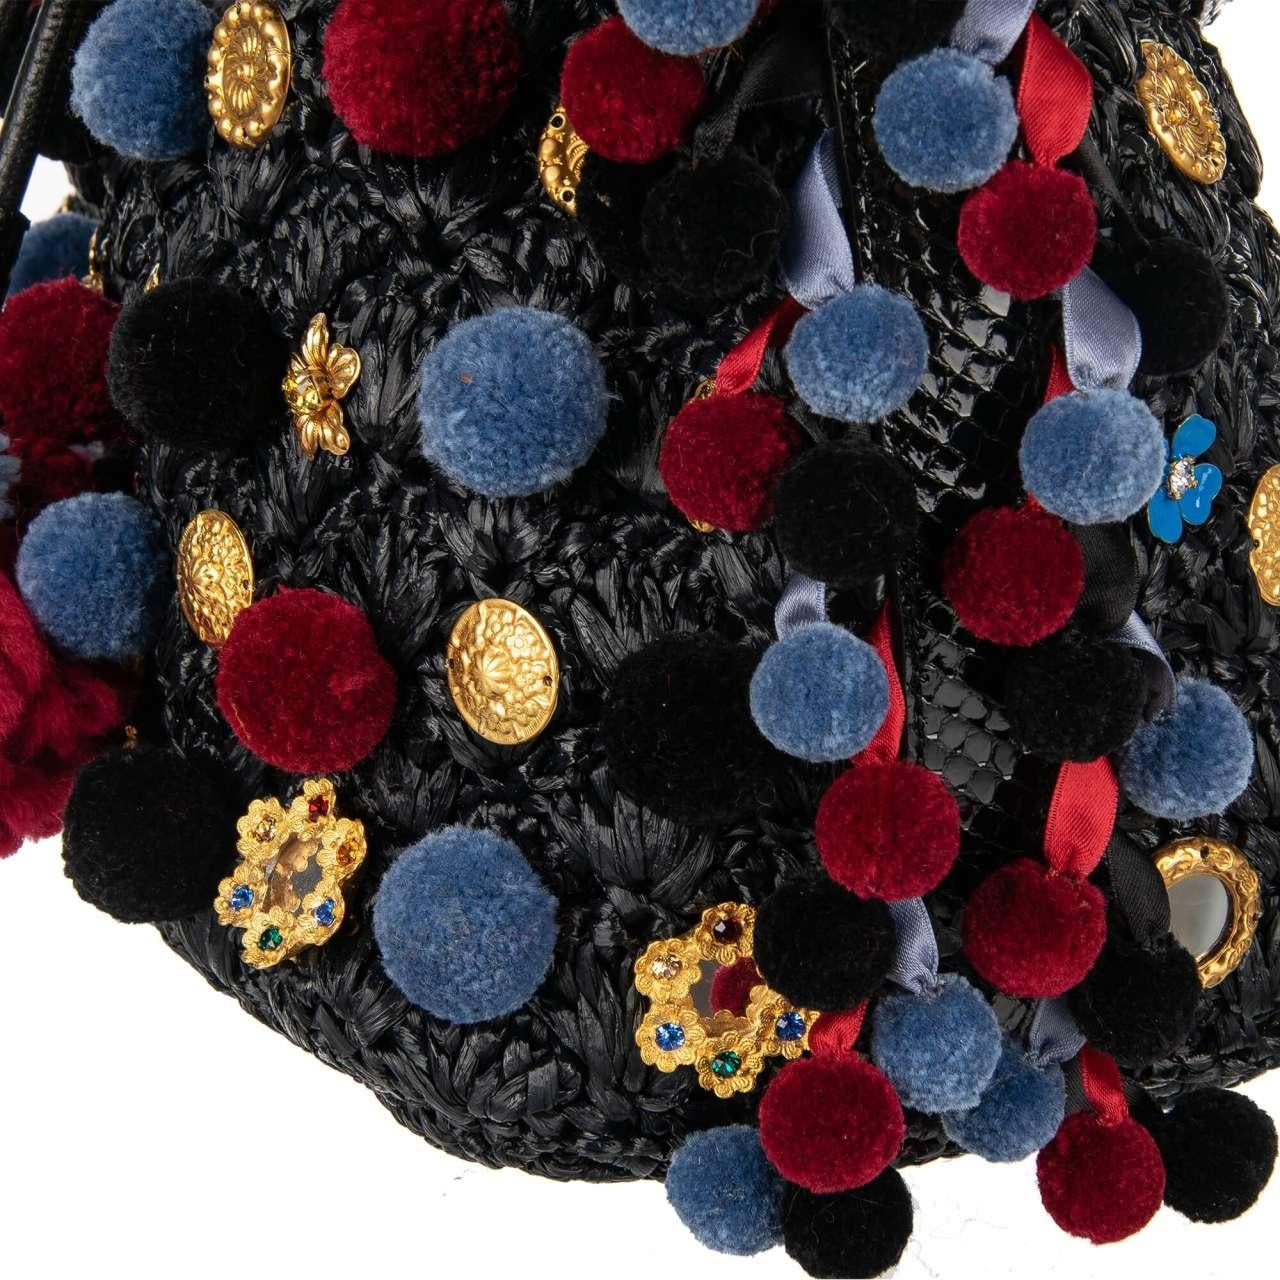 Dolce & Gabbana - Raffia Bucket Bag CLAUDIA with Pompoms and Crystals Black Red 2